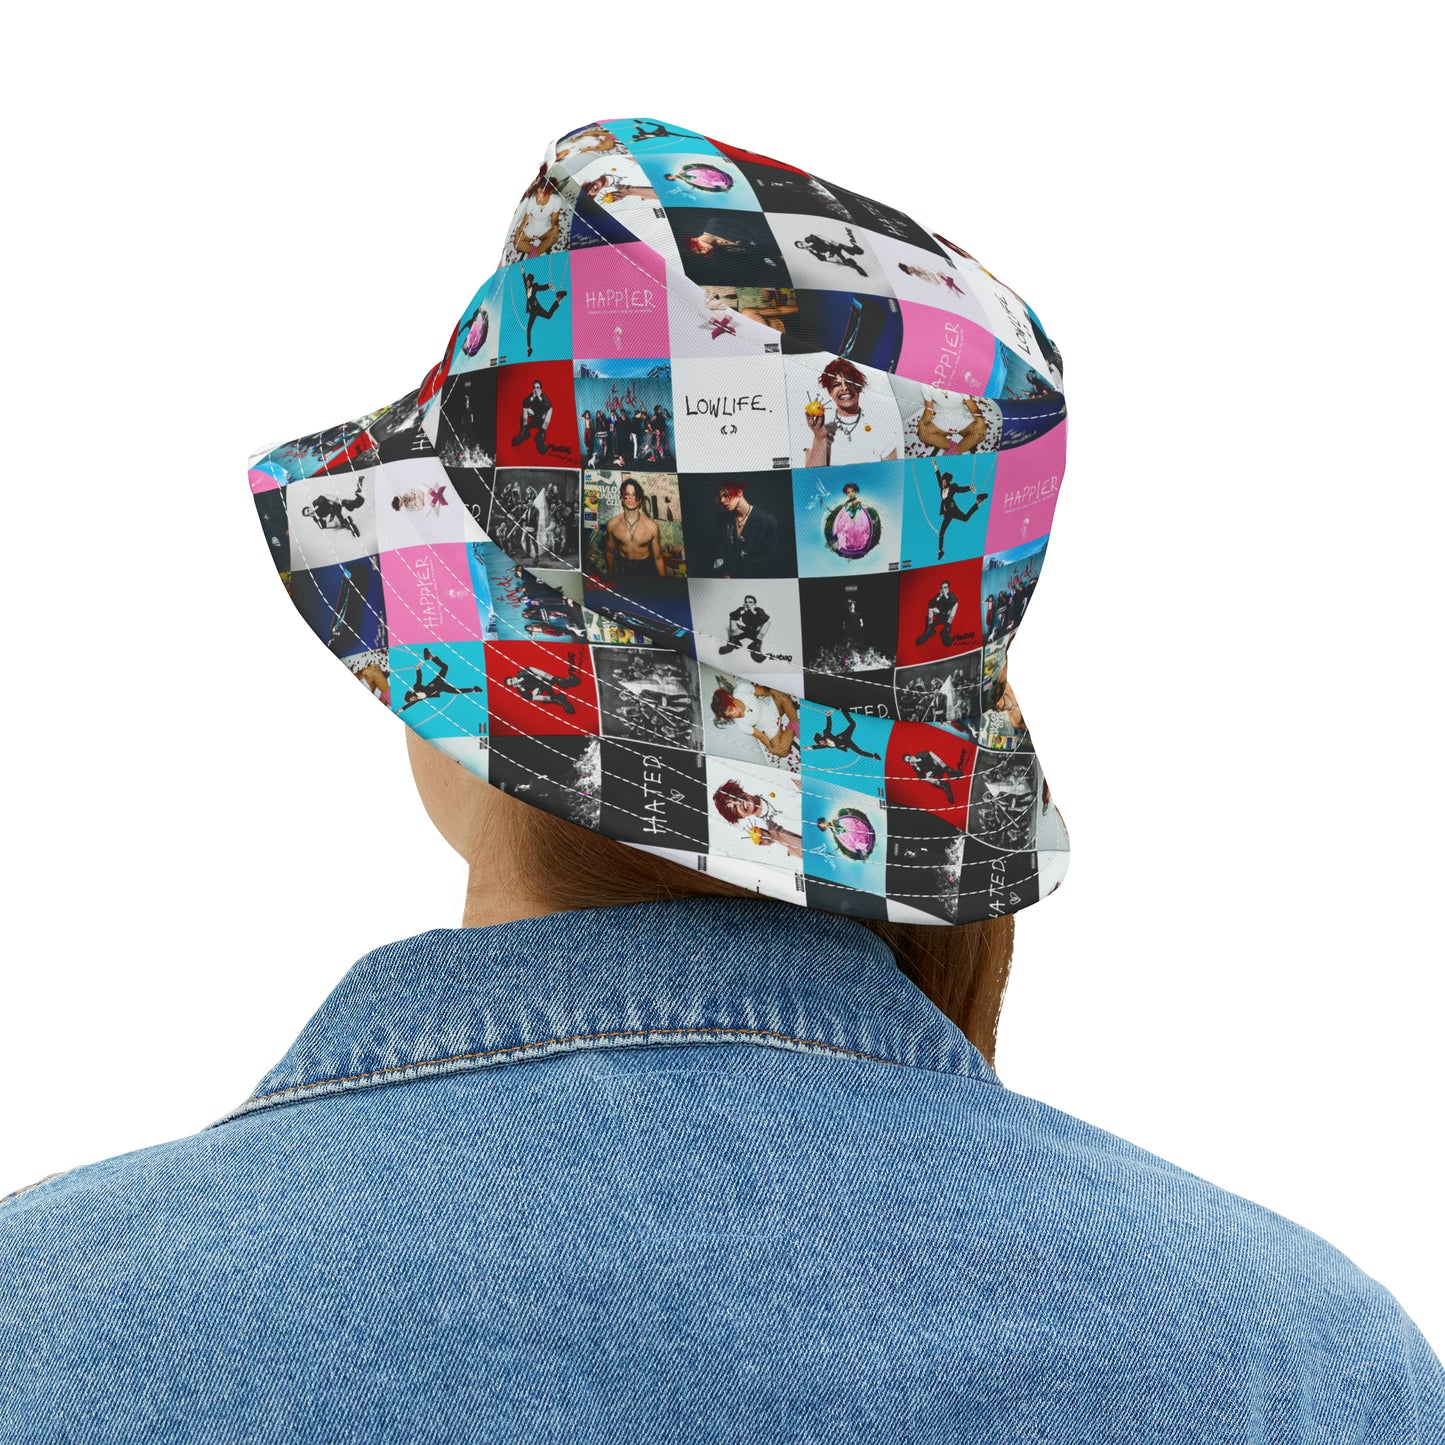 YUNGBLUD Album Cover Art Collage Bucket Hat